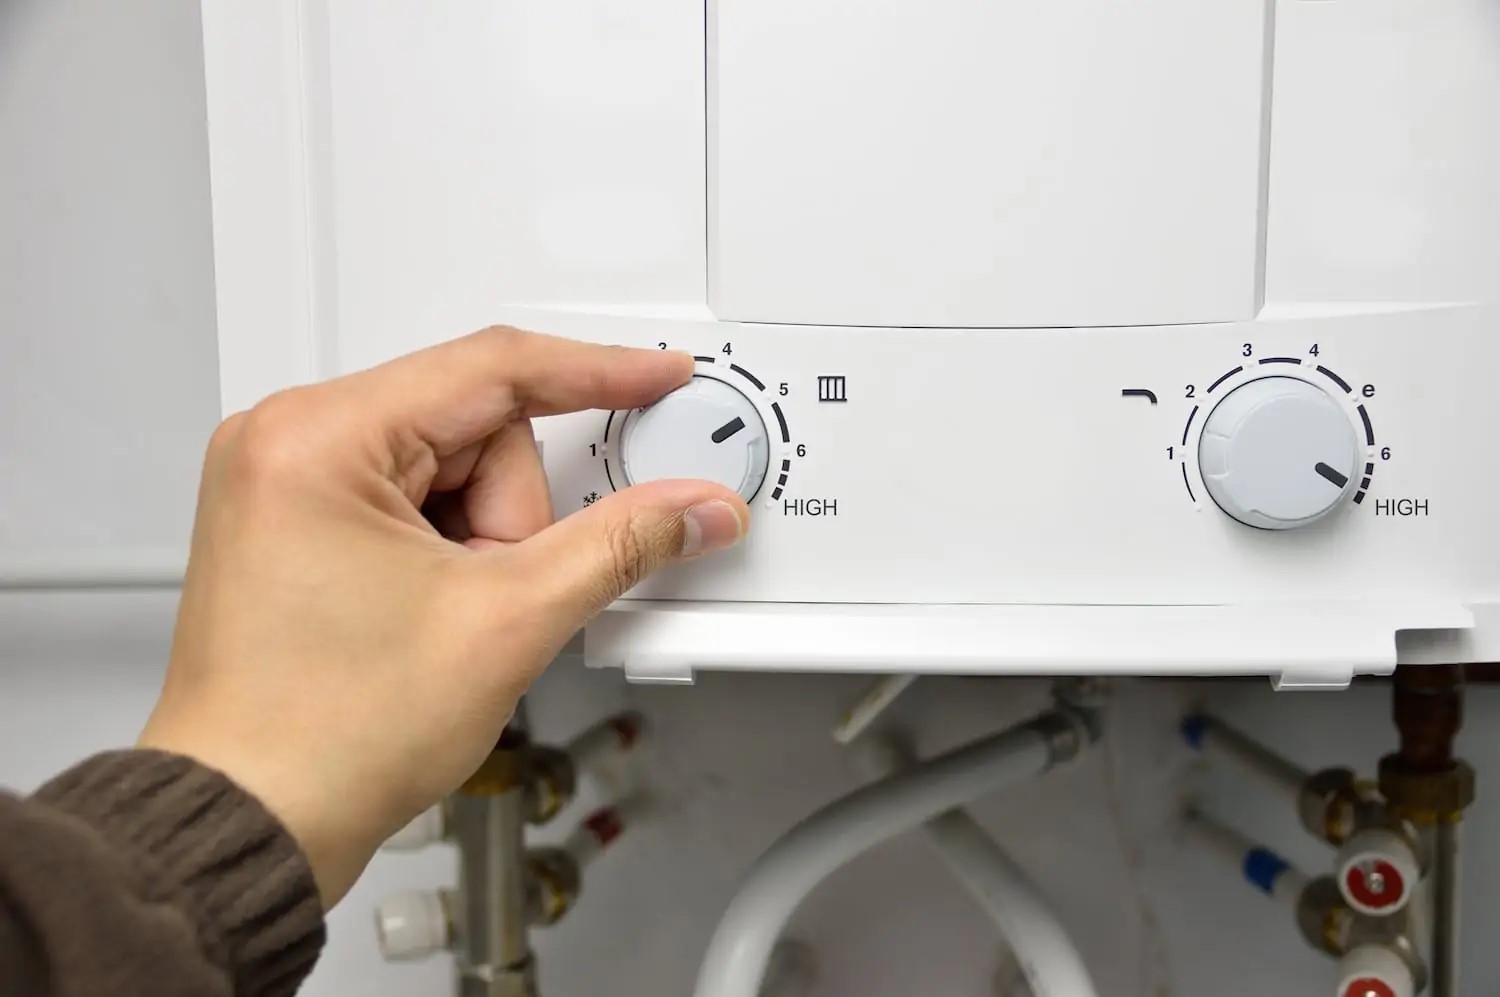 Hand adjusting knob on a tankless water heater